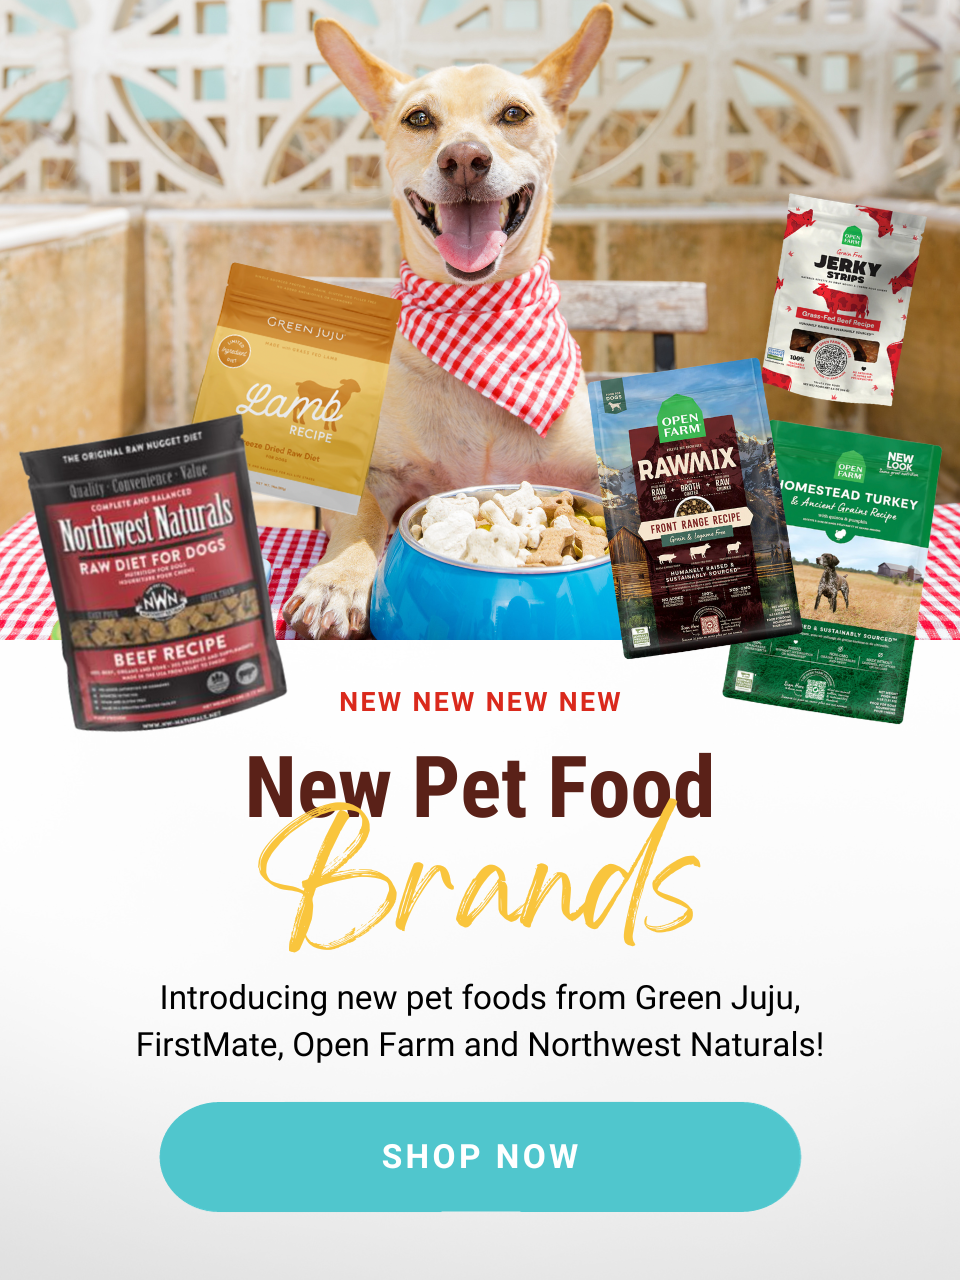 Introducing new pet foods from Green Juju, FirstMate, Open Farm and Northwest Naturals! Shop now!